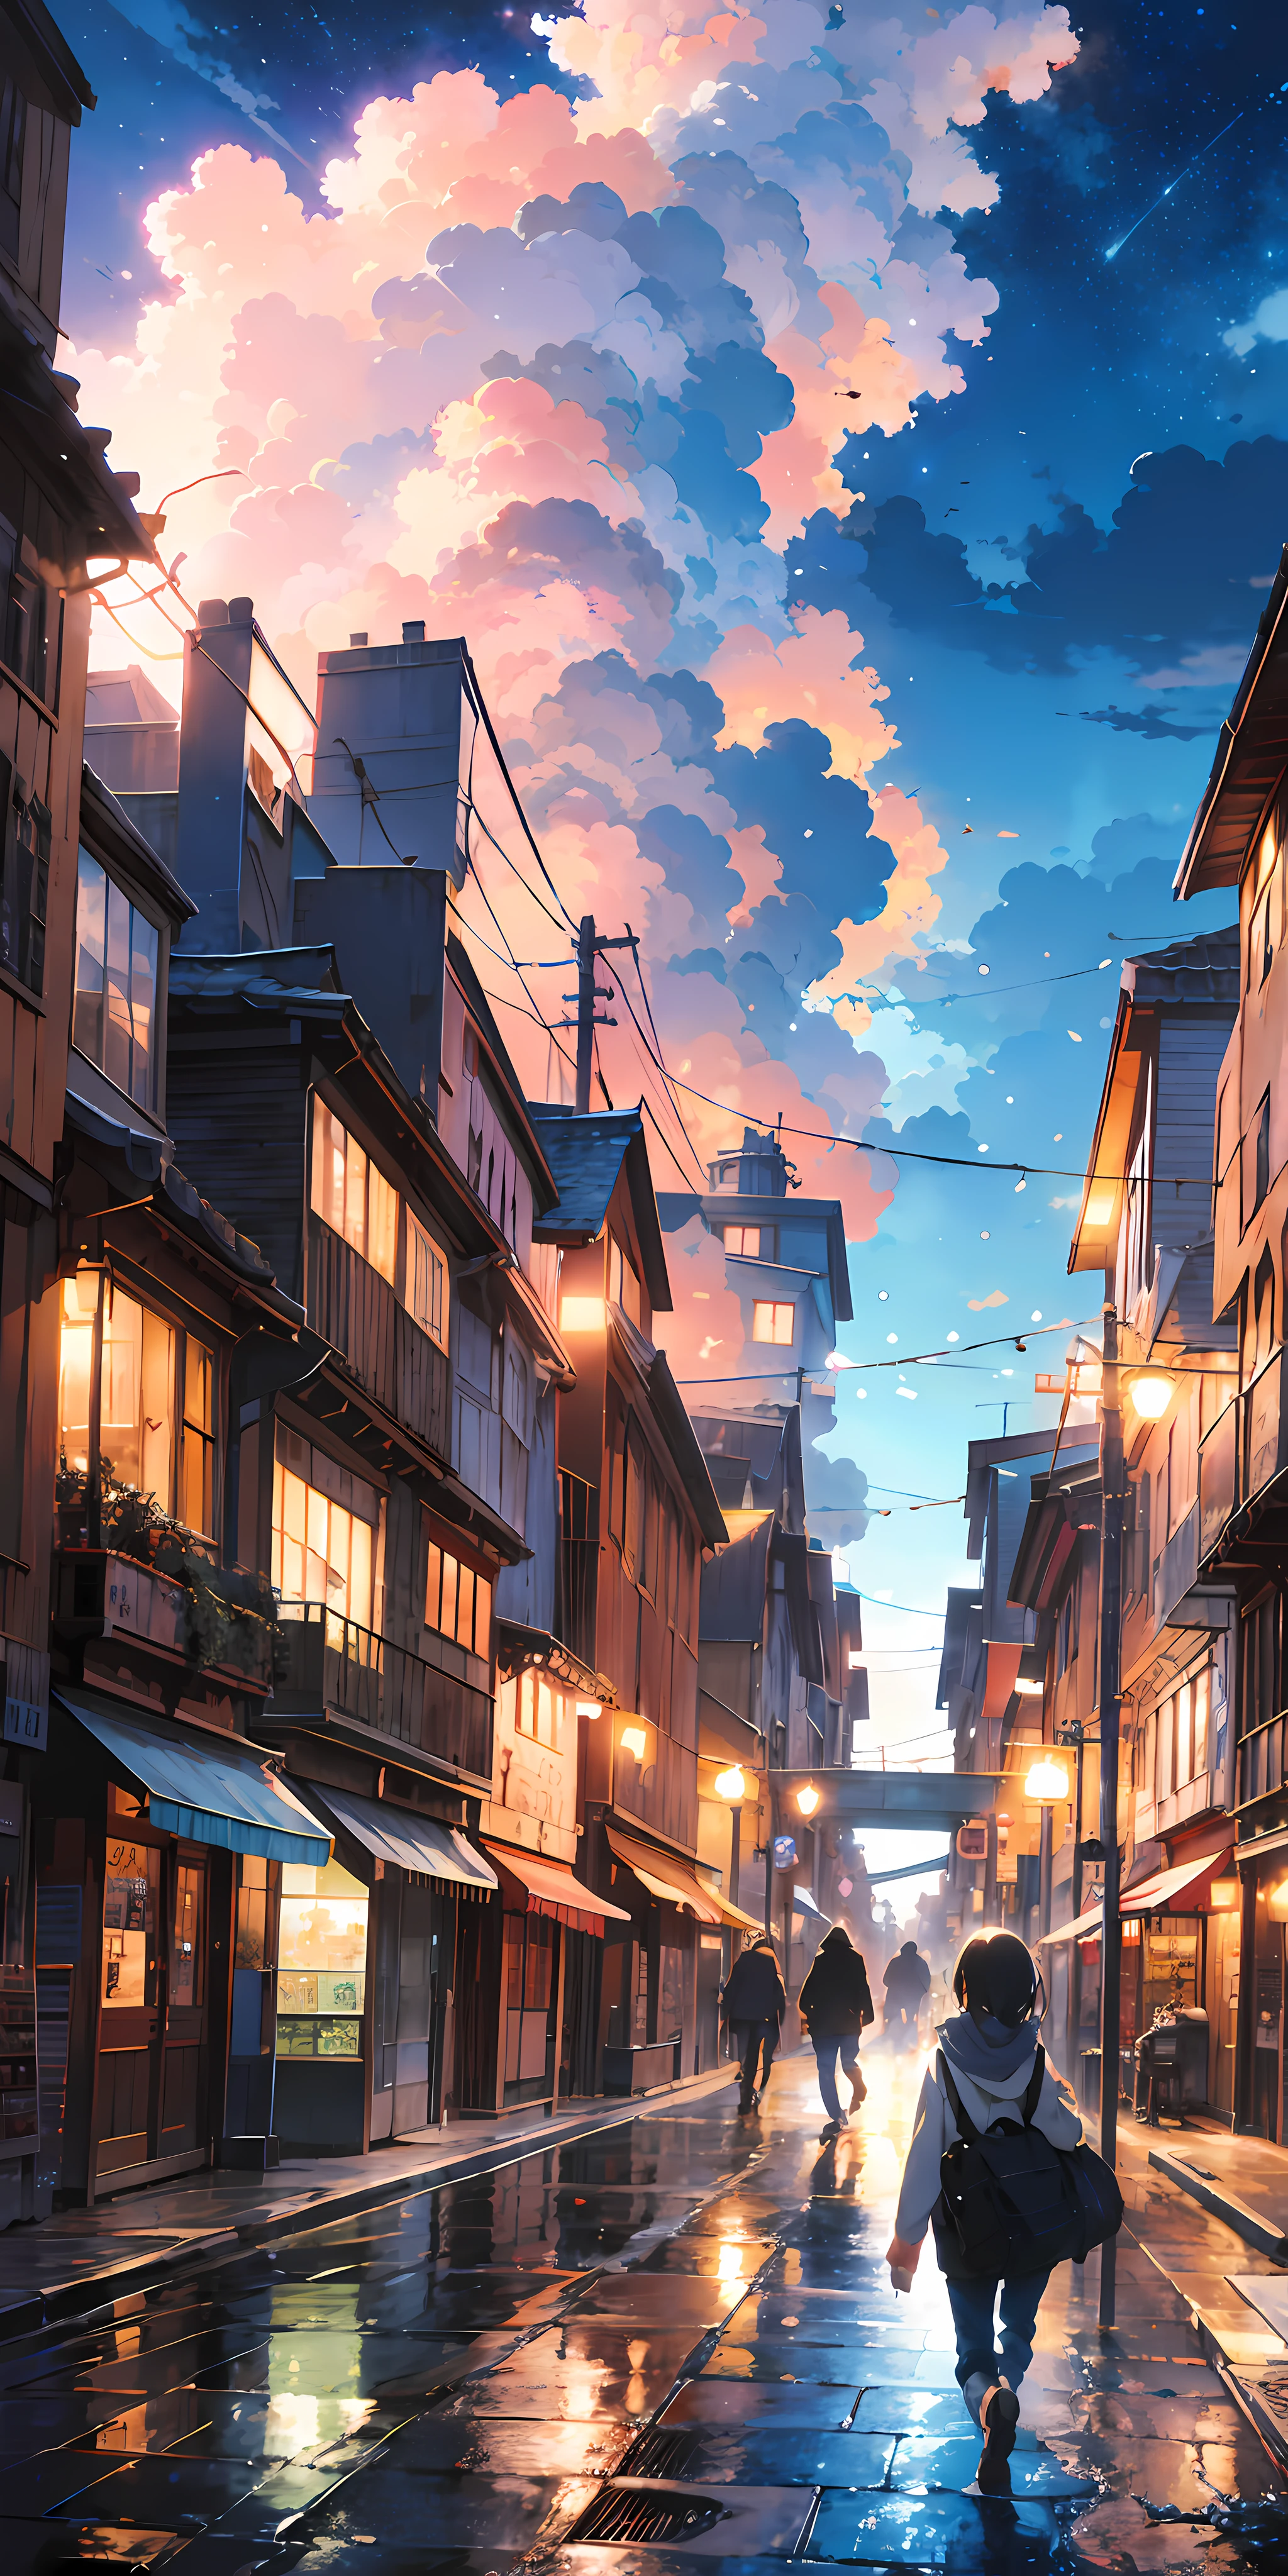 Anime landscape of a city with a tower, a person walking on a snowy path, cosmic sky. By: Makoto Shinkai, beautiful anime scenes, Makoto Shinkai, Cyril Rolando, anime background art, beautiful anime scenery, anime art wallpaper 4k, anime art wallpaper 4k, 4k anime wallpaper, anime wallpaper 4k, anime wallpaper 4k, details Reinforced, perfect detail processing.